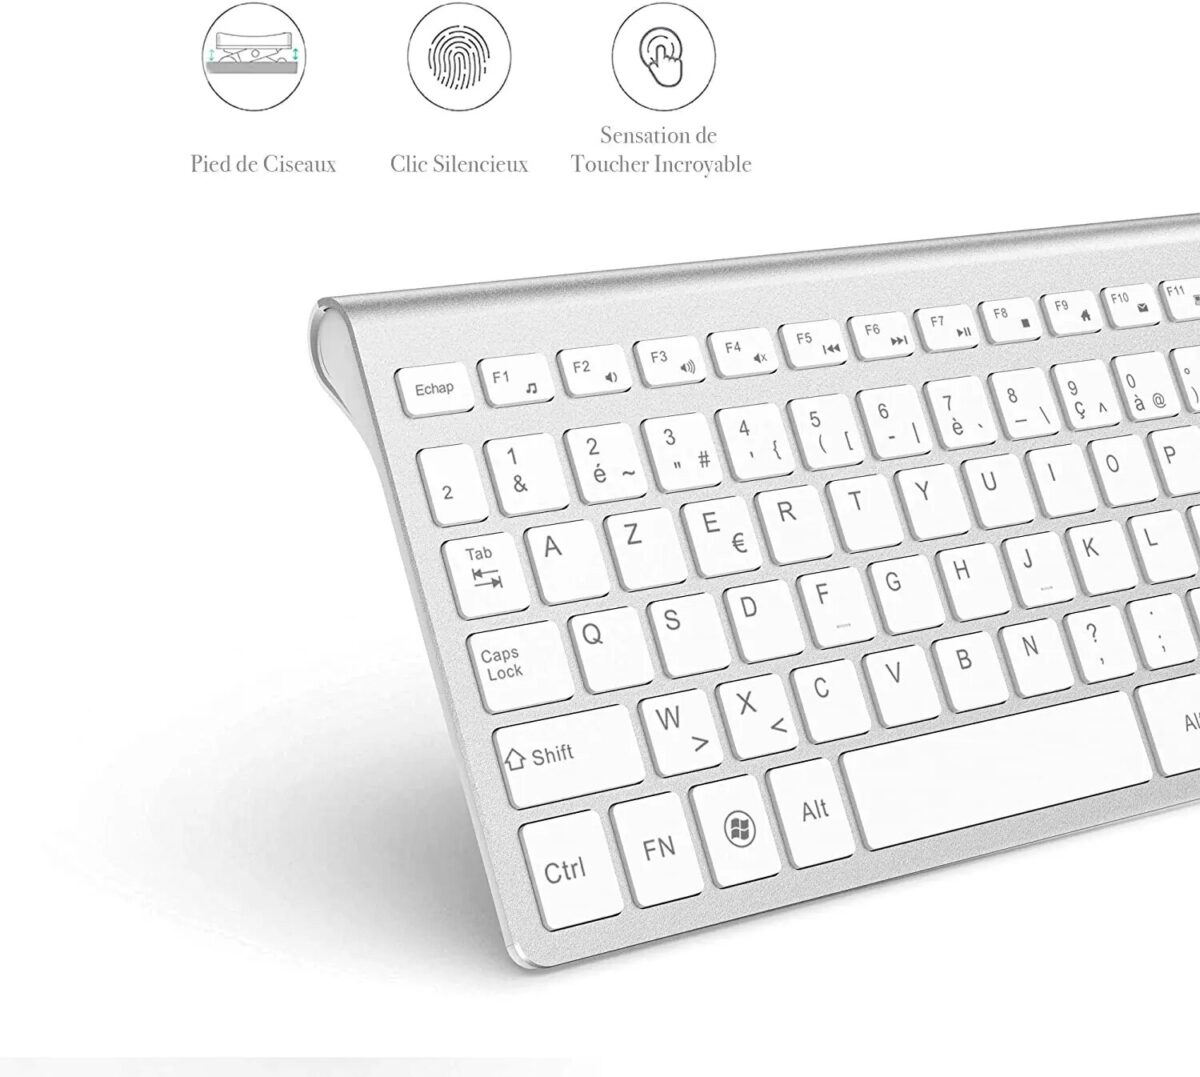 AZERTY French 2 4G Wireless Keyboard Mouse Ergonomic Compatible with IMac Mac PC Laptop Tablet Computer 3 French 2.4G Wireless Keyboard Mouse Compatible with iMac PC Laptop Tablet Computer Windows (Silver White)